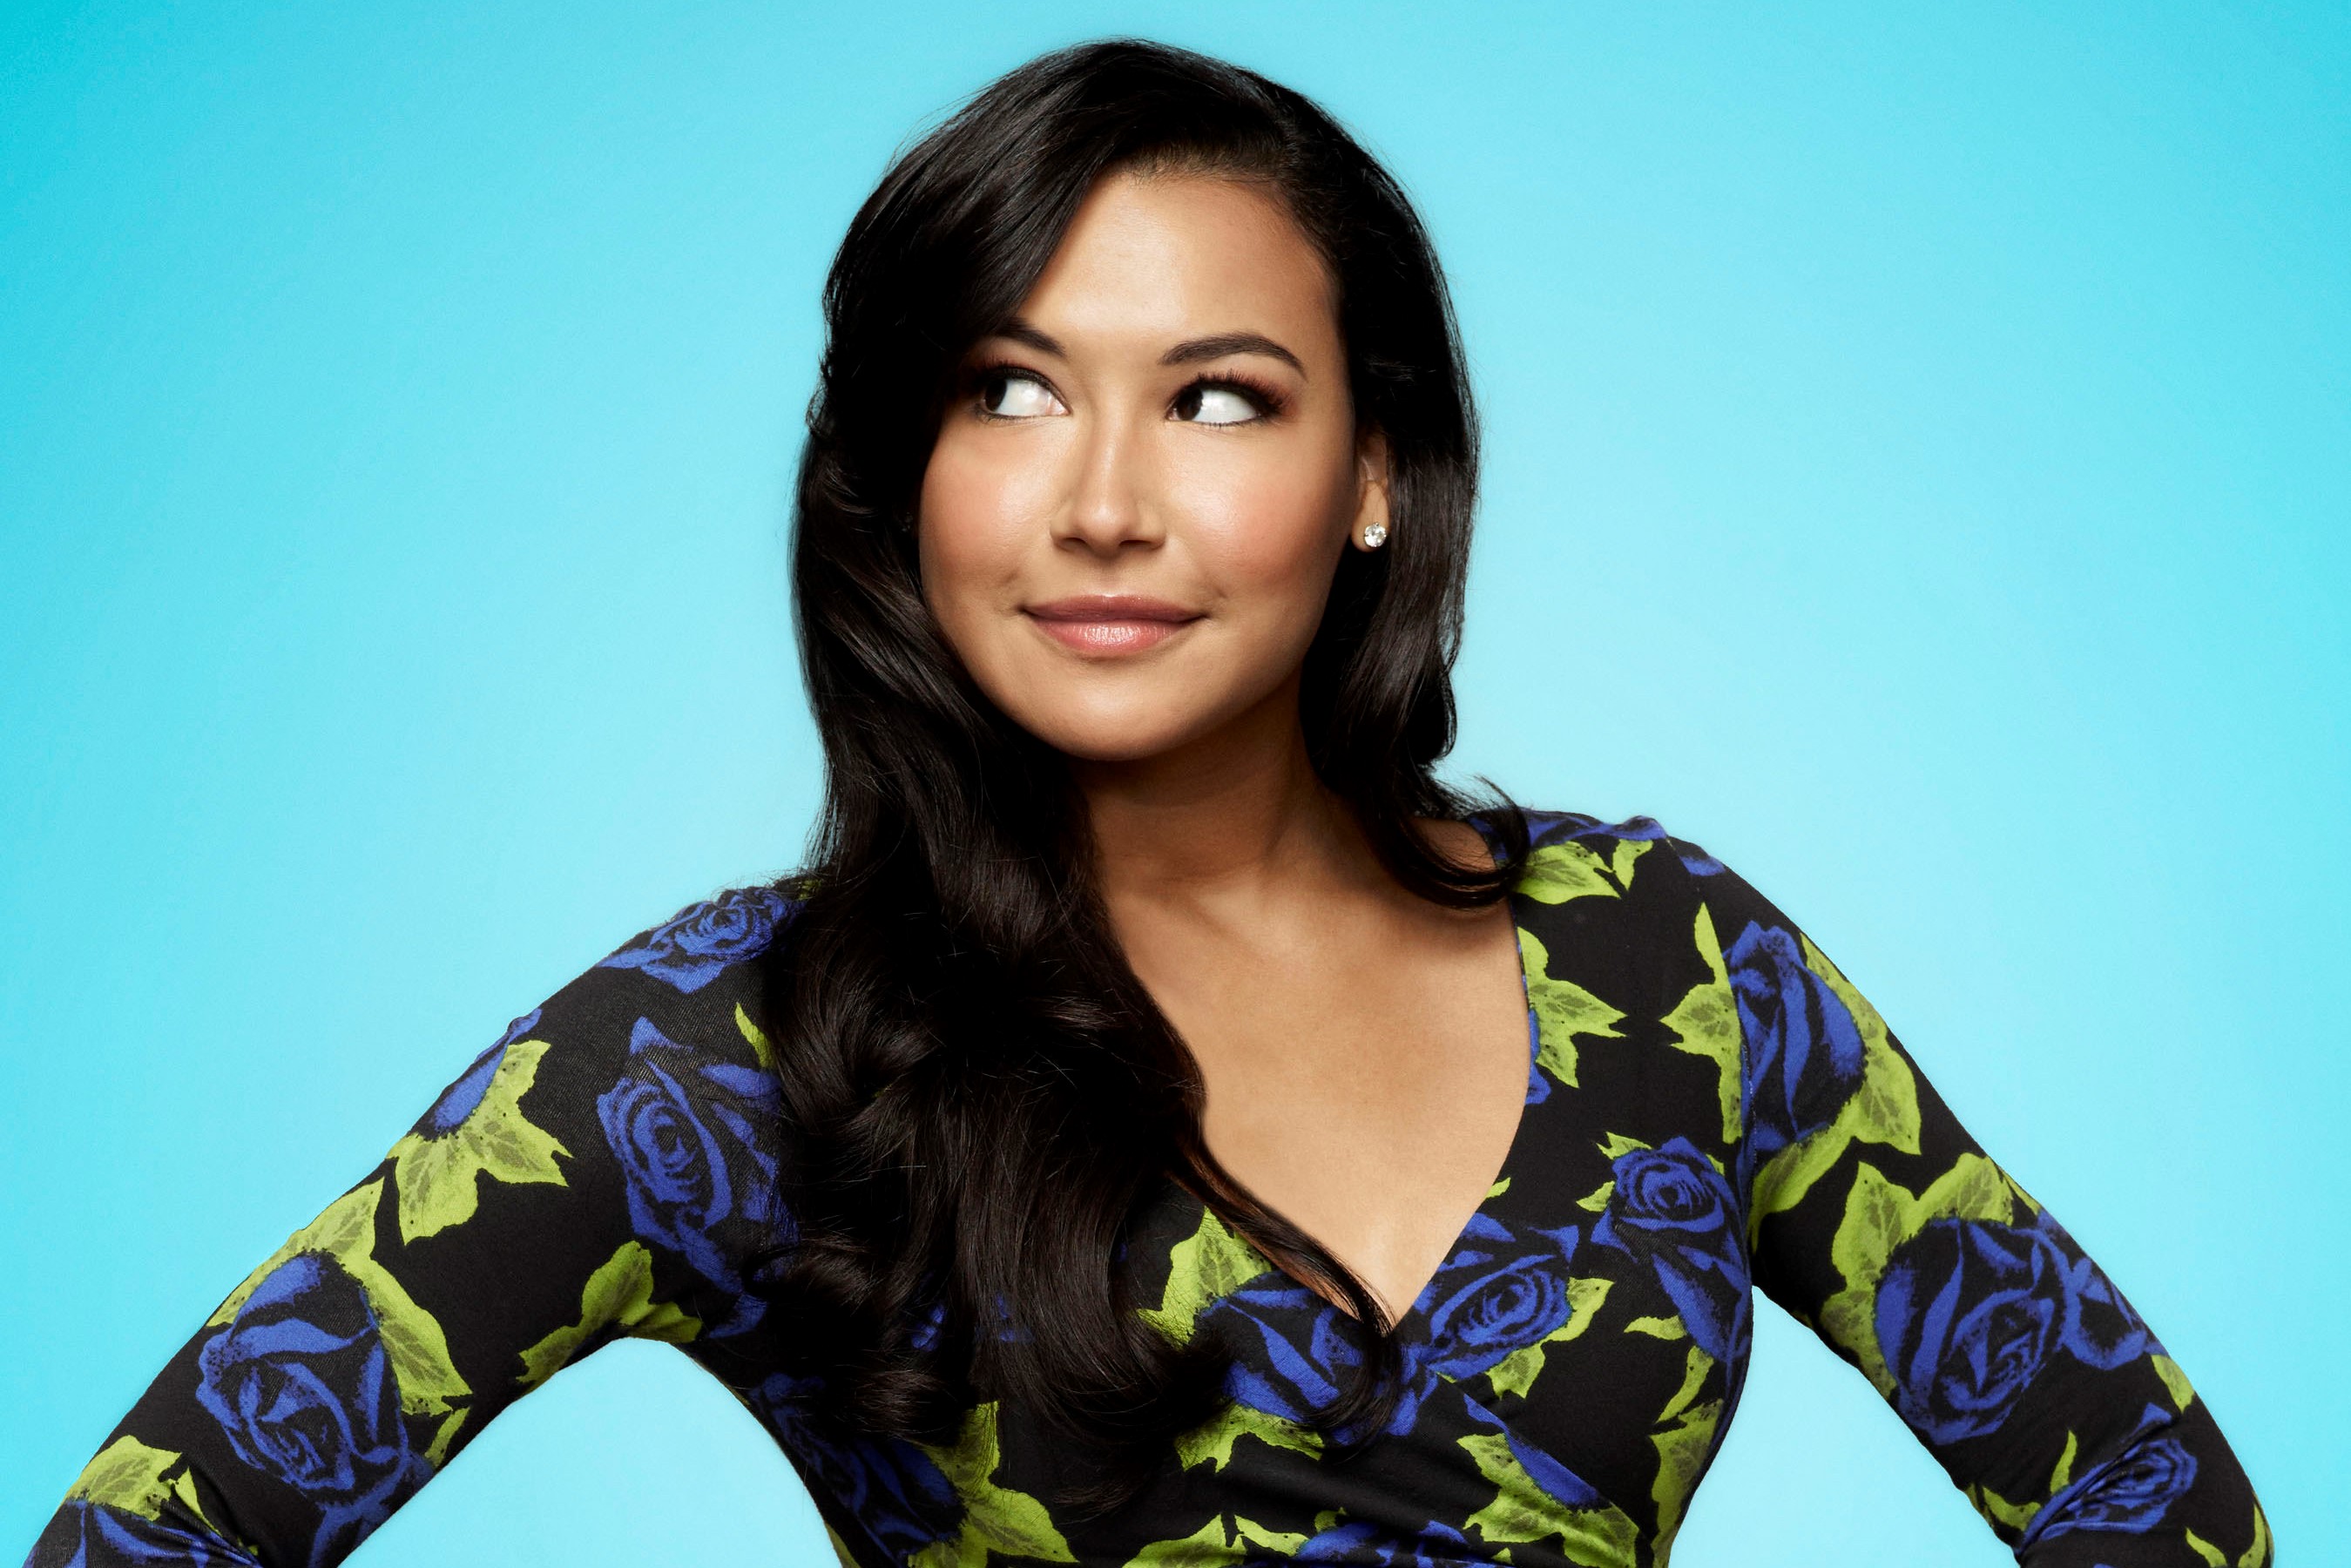 'Glee' star Naya Rivera wears a black long-sleeved shirt with blue roses and green leaves on it. 'Glee' is leaving Netflix in Nov. 2021, so fans will have to look elsewhere to watch Rivera play Santana Lopez.